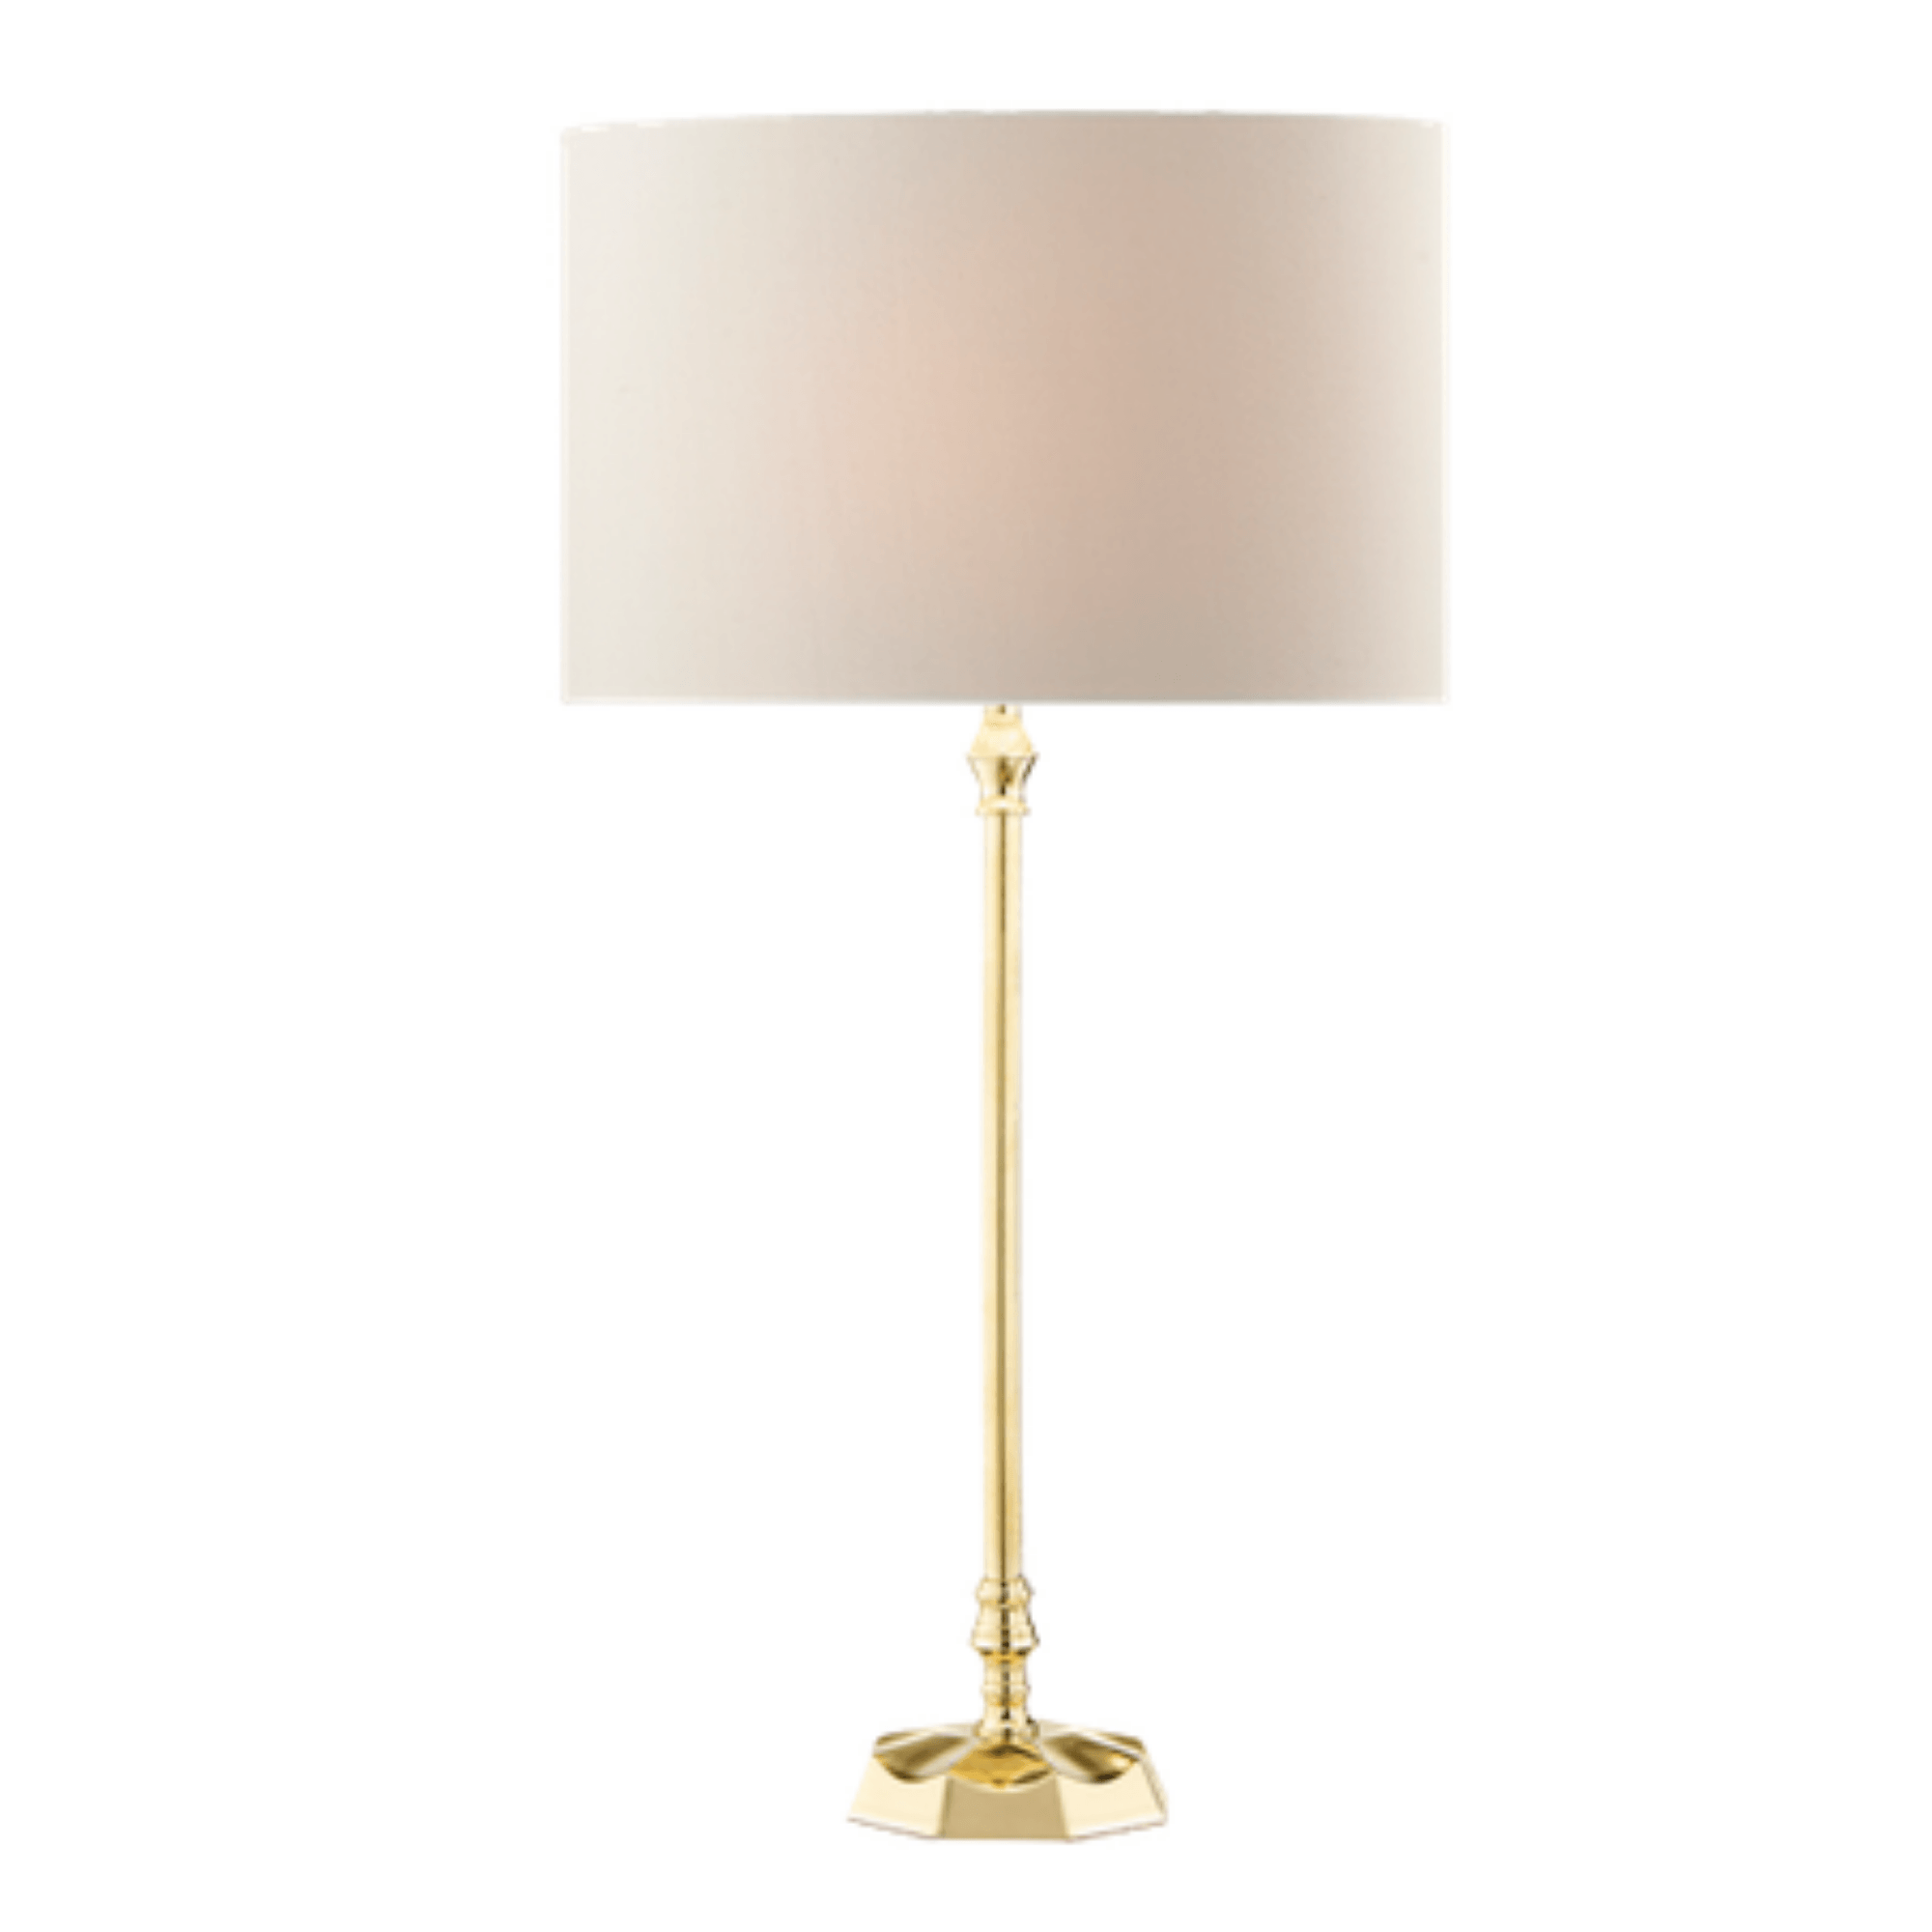 Dar Iowa Table Lamp Natural Brass Base Only - Cusack Lighting